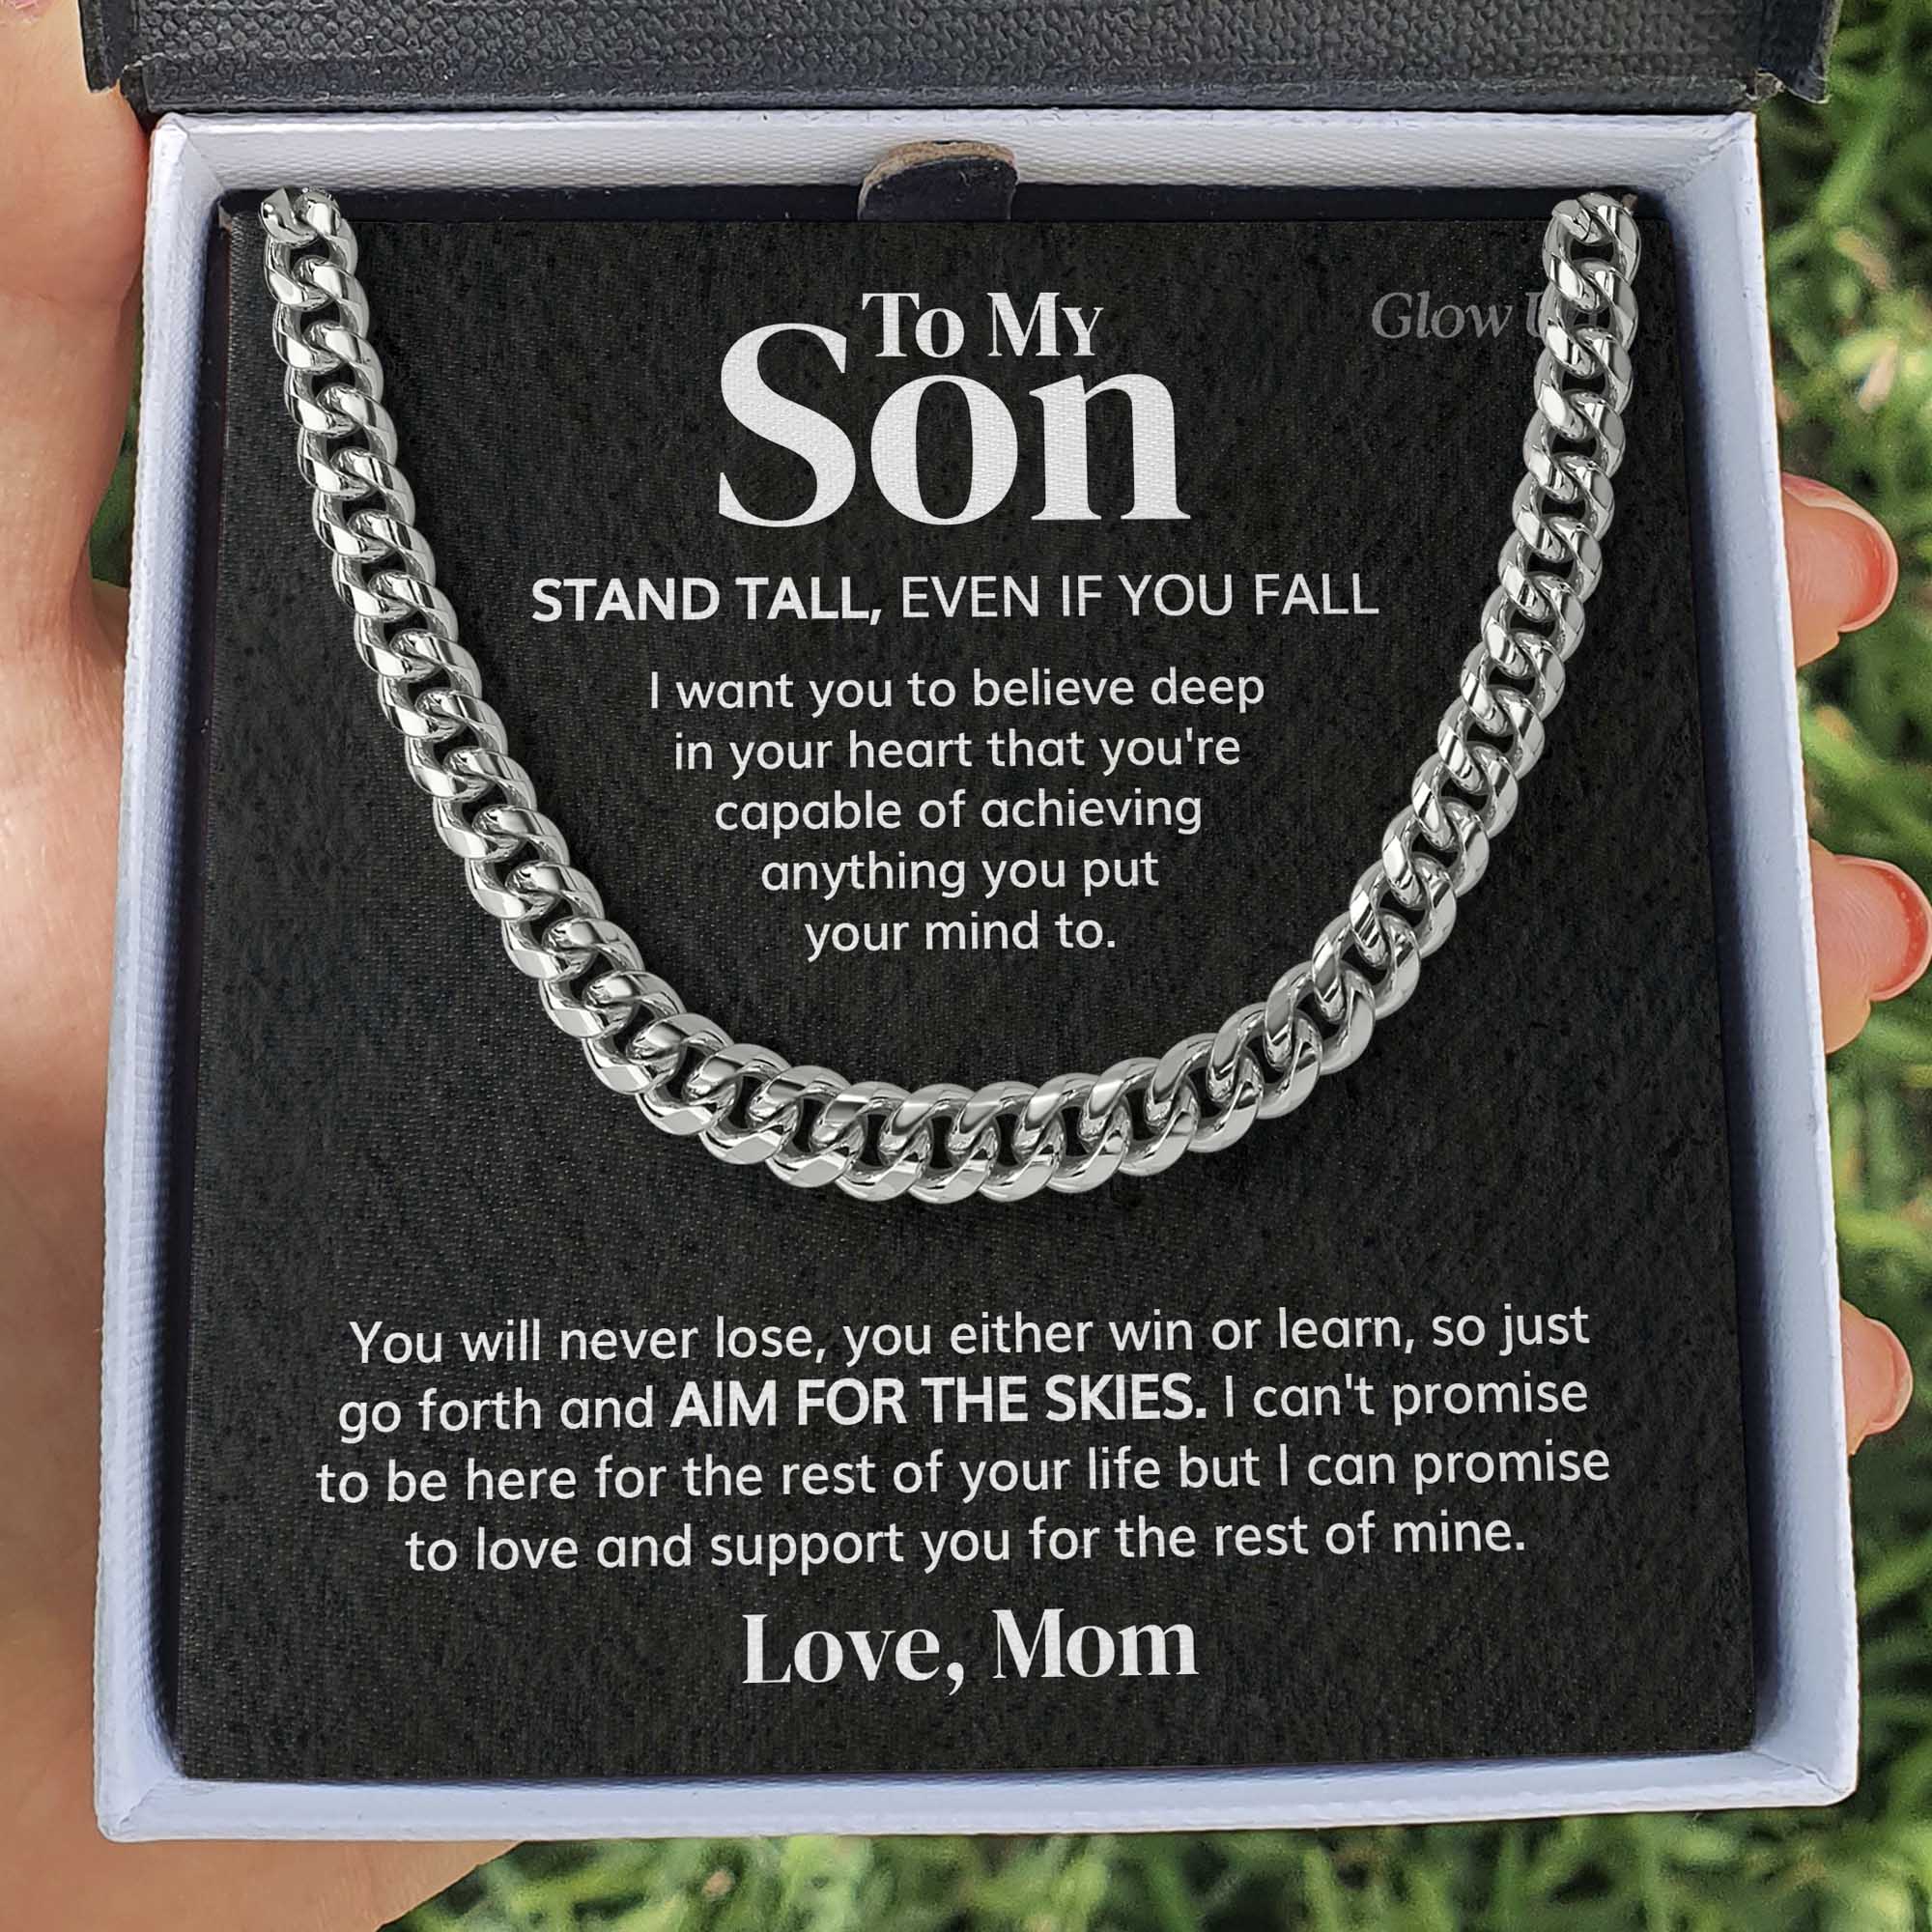 ShineOn Fulfillment Jewelry 316L Stainless Steel / Two-Toned Box To my Son - Aim for the skies - Cuban Link Chain Necklace